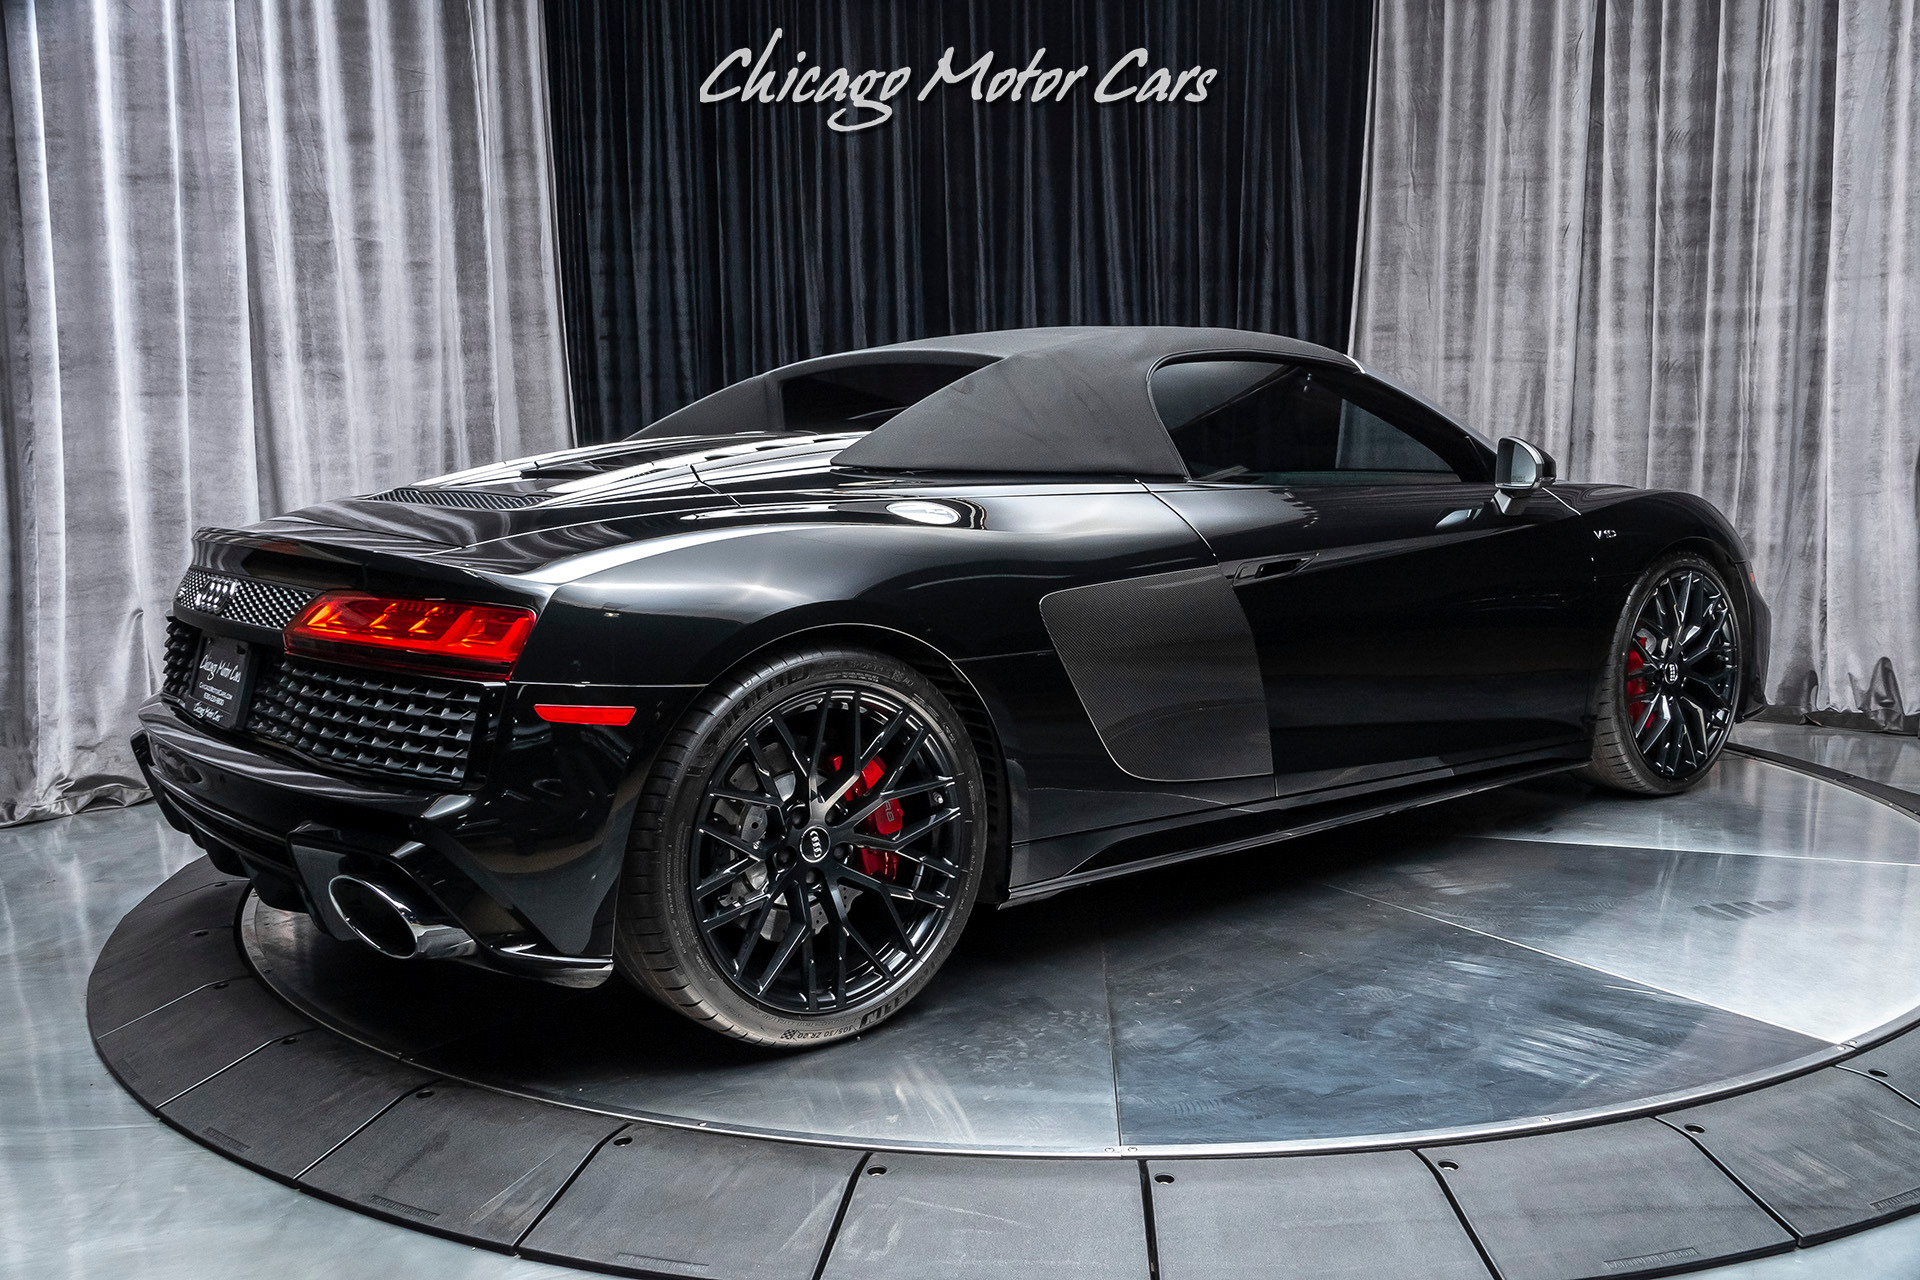 Used 2020 Audi R8 5.2L V10 Quattro Spyder Convertible MSRP 203k+ ONLY